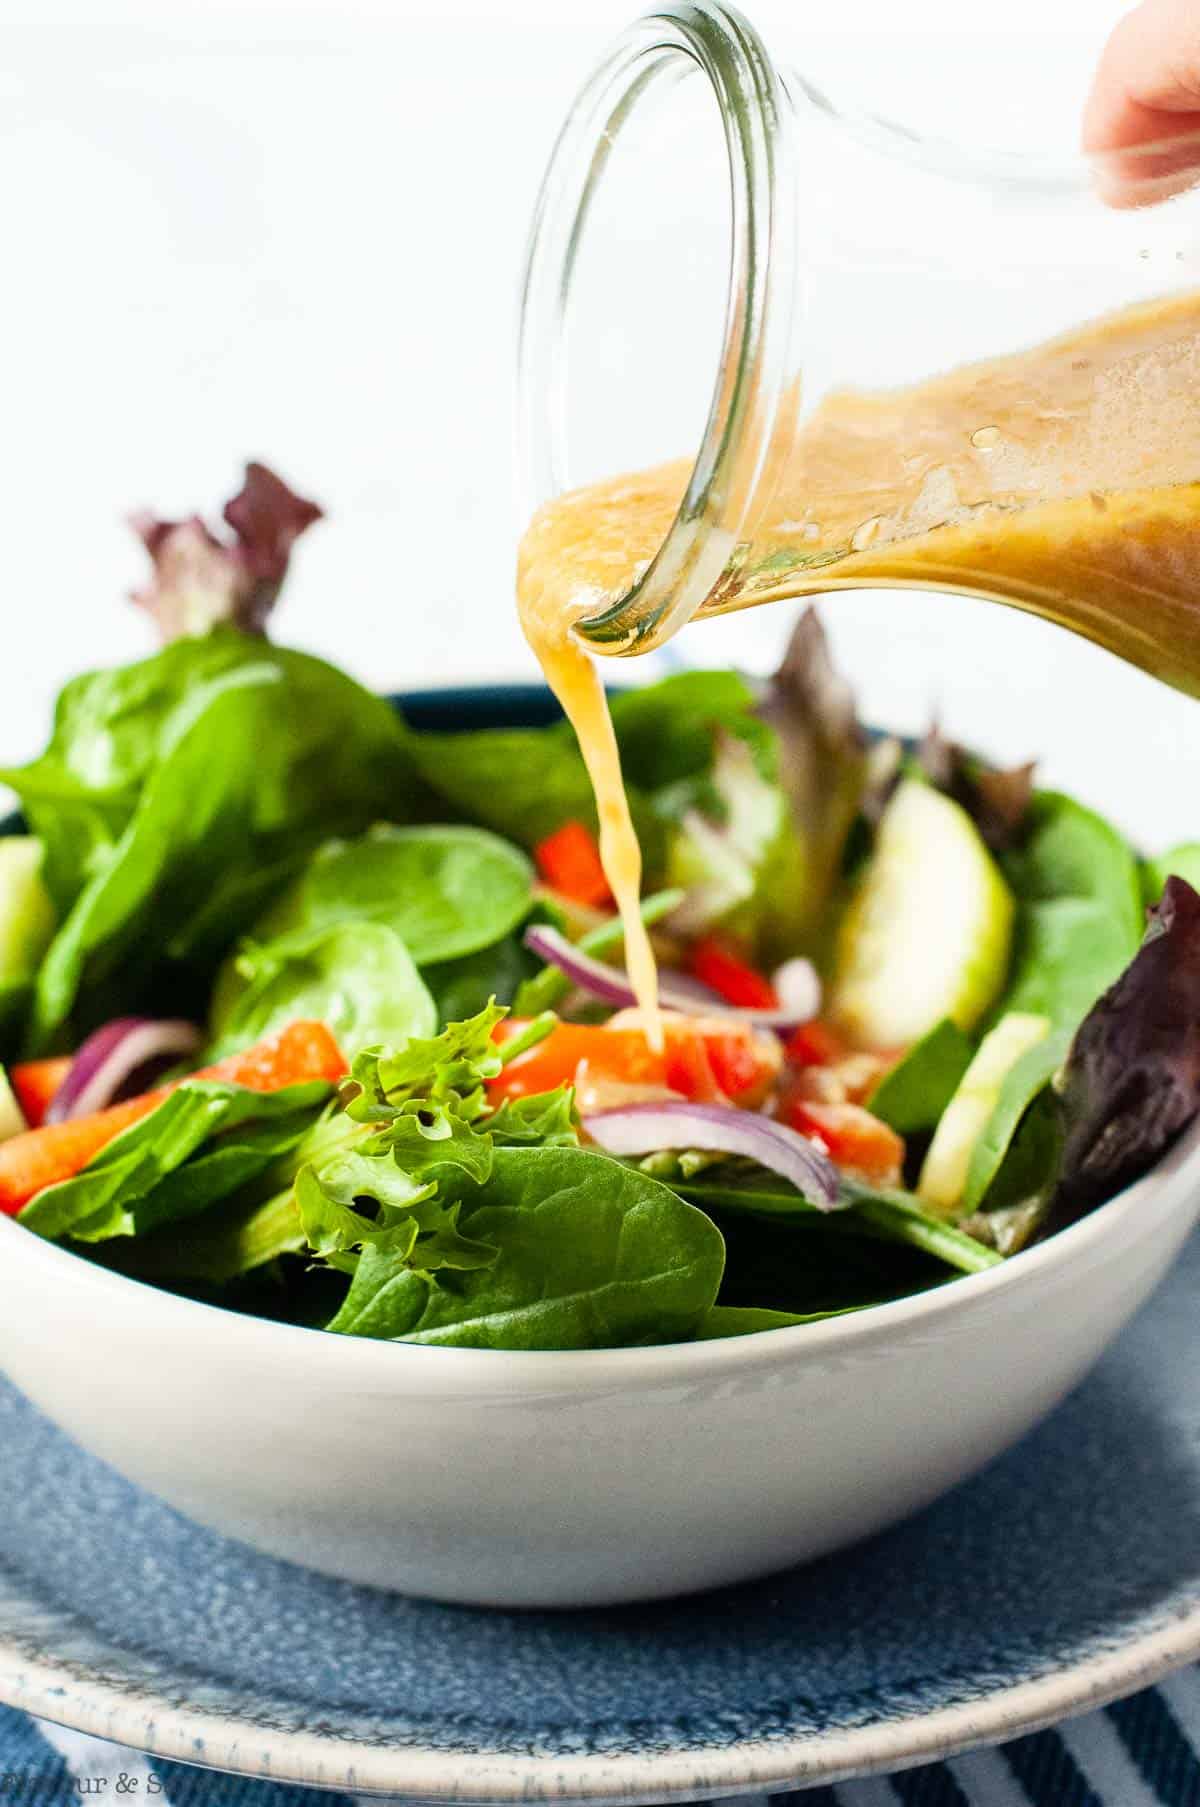 Pouring Asian dressing on a salad.